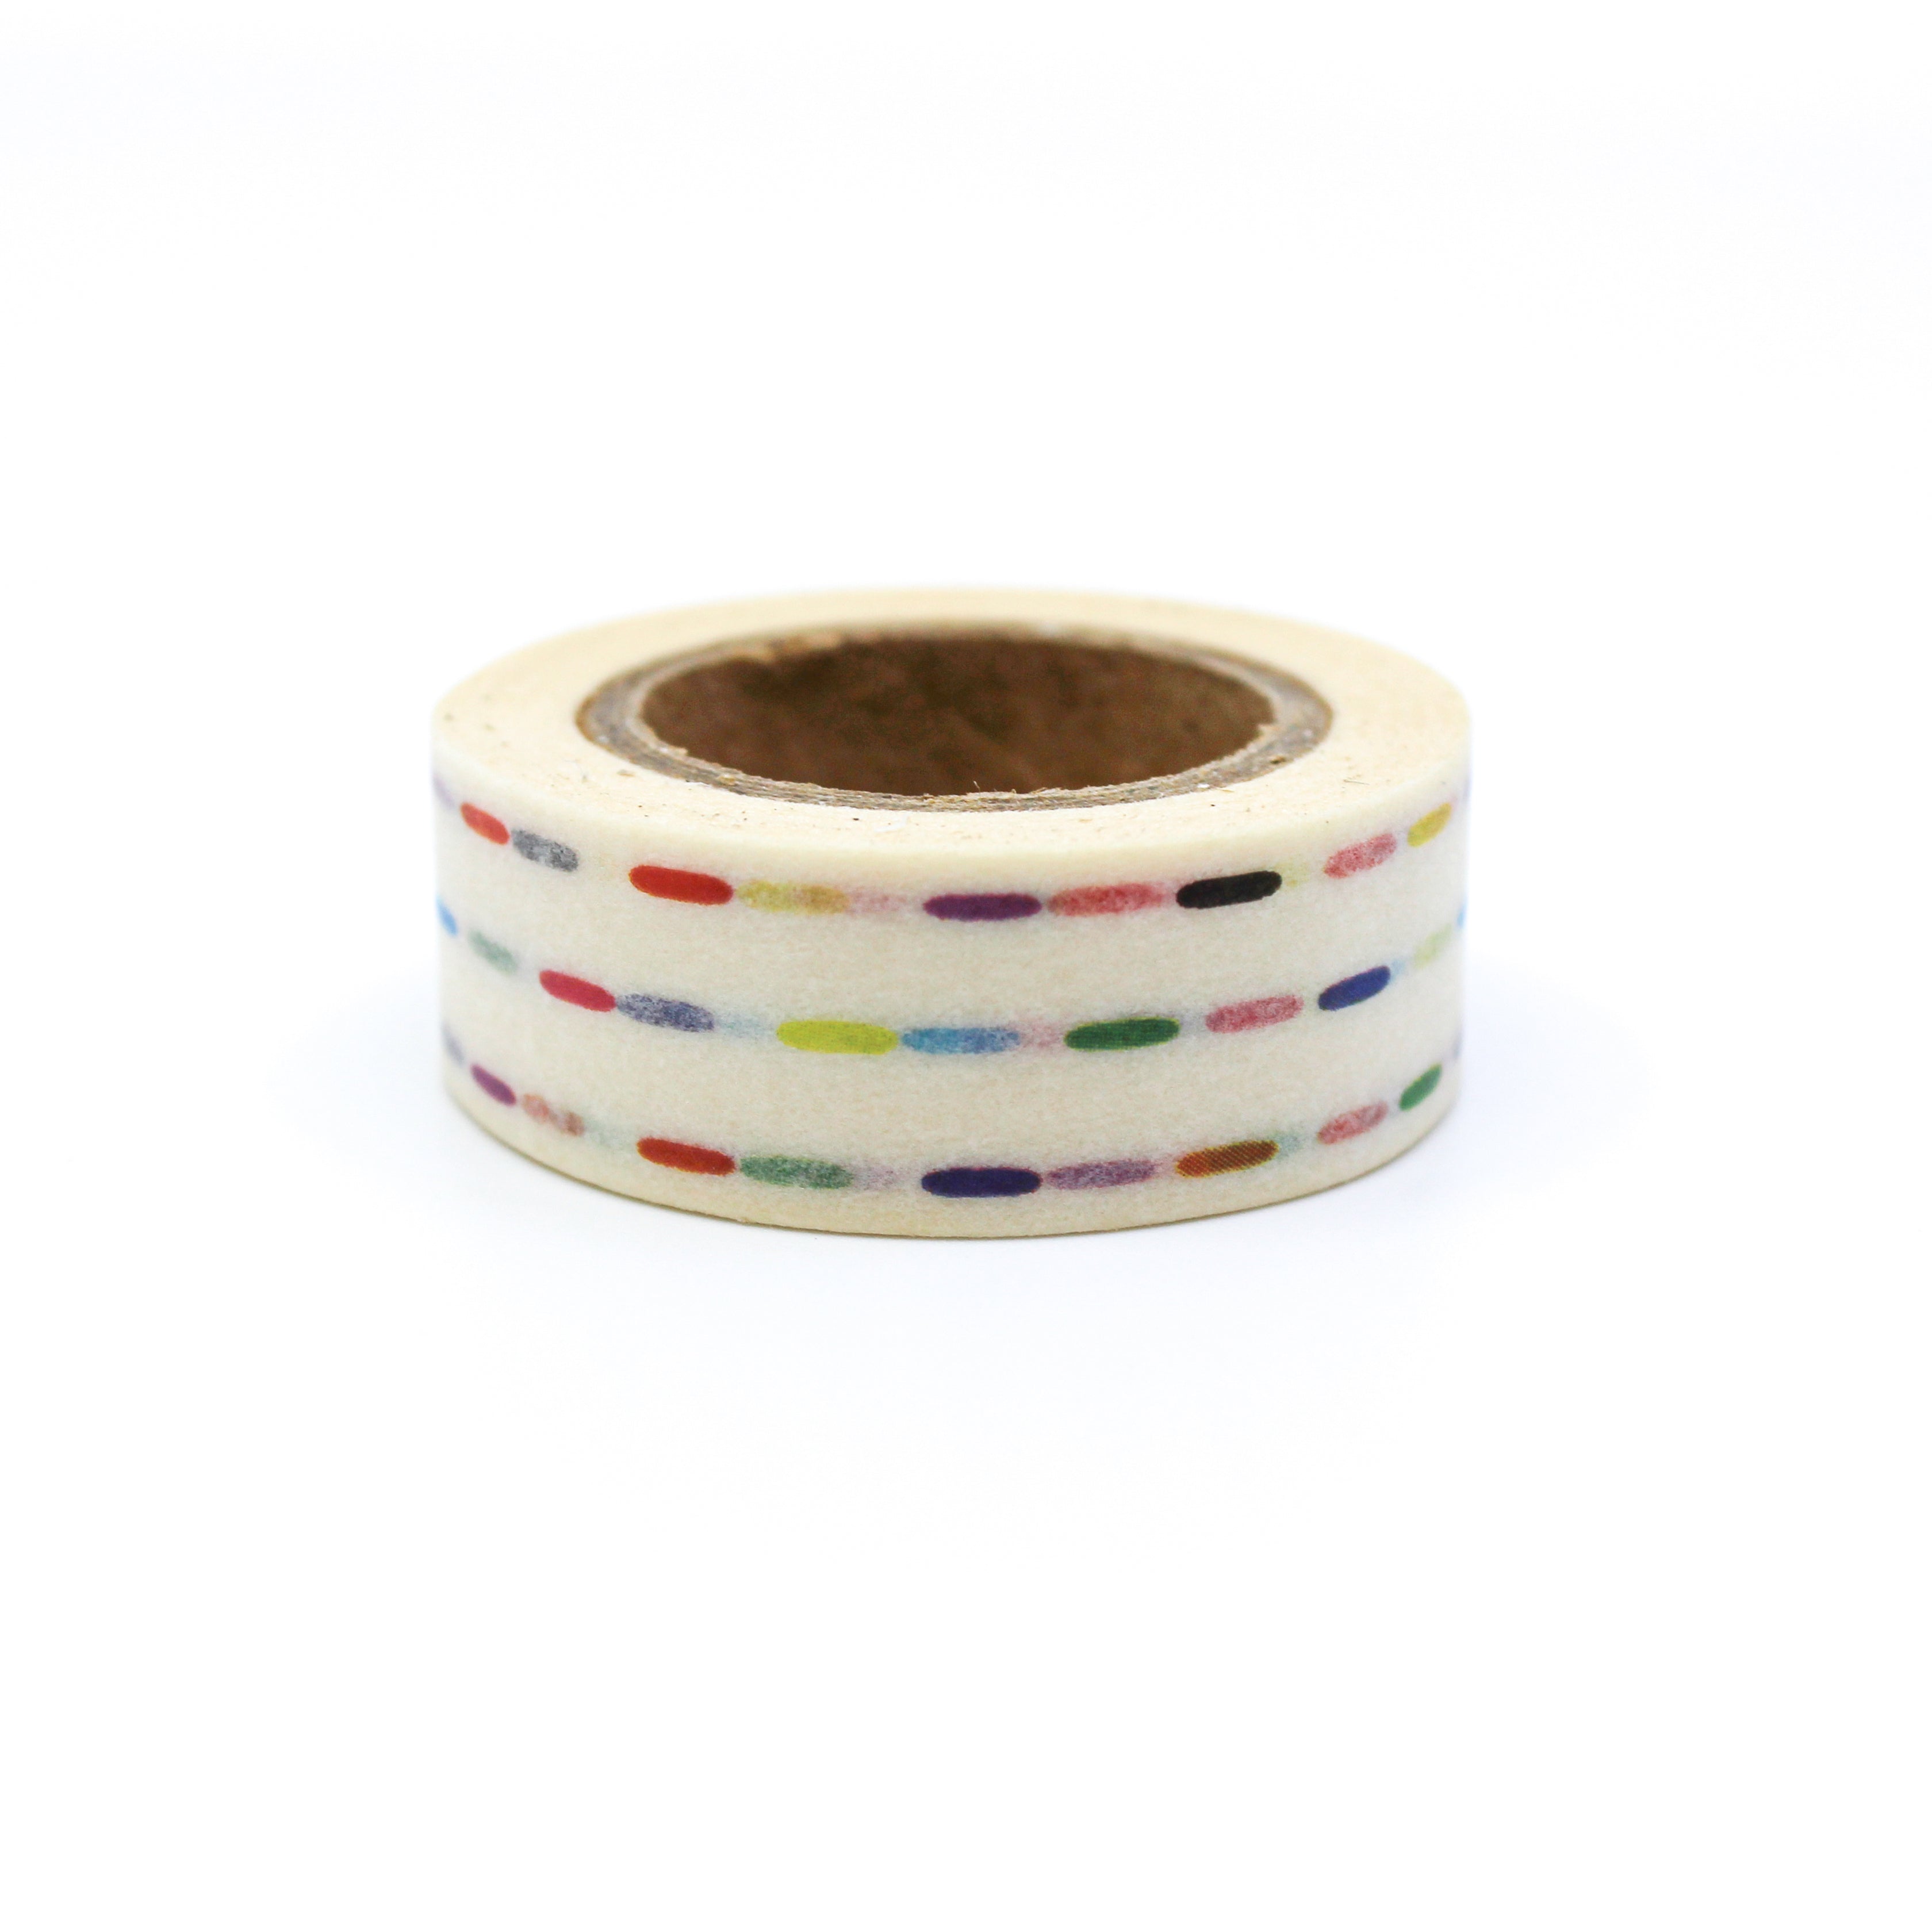 This is a colorful rainbow dashed lines or dots with white background washi tape from BBB Supplies Craft Shop